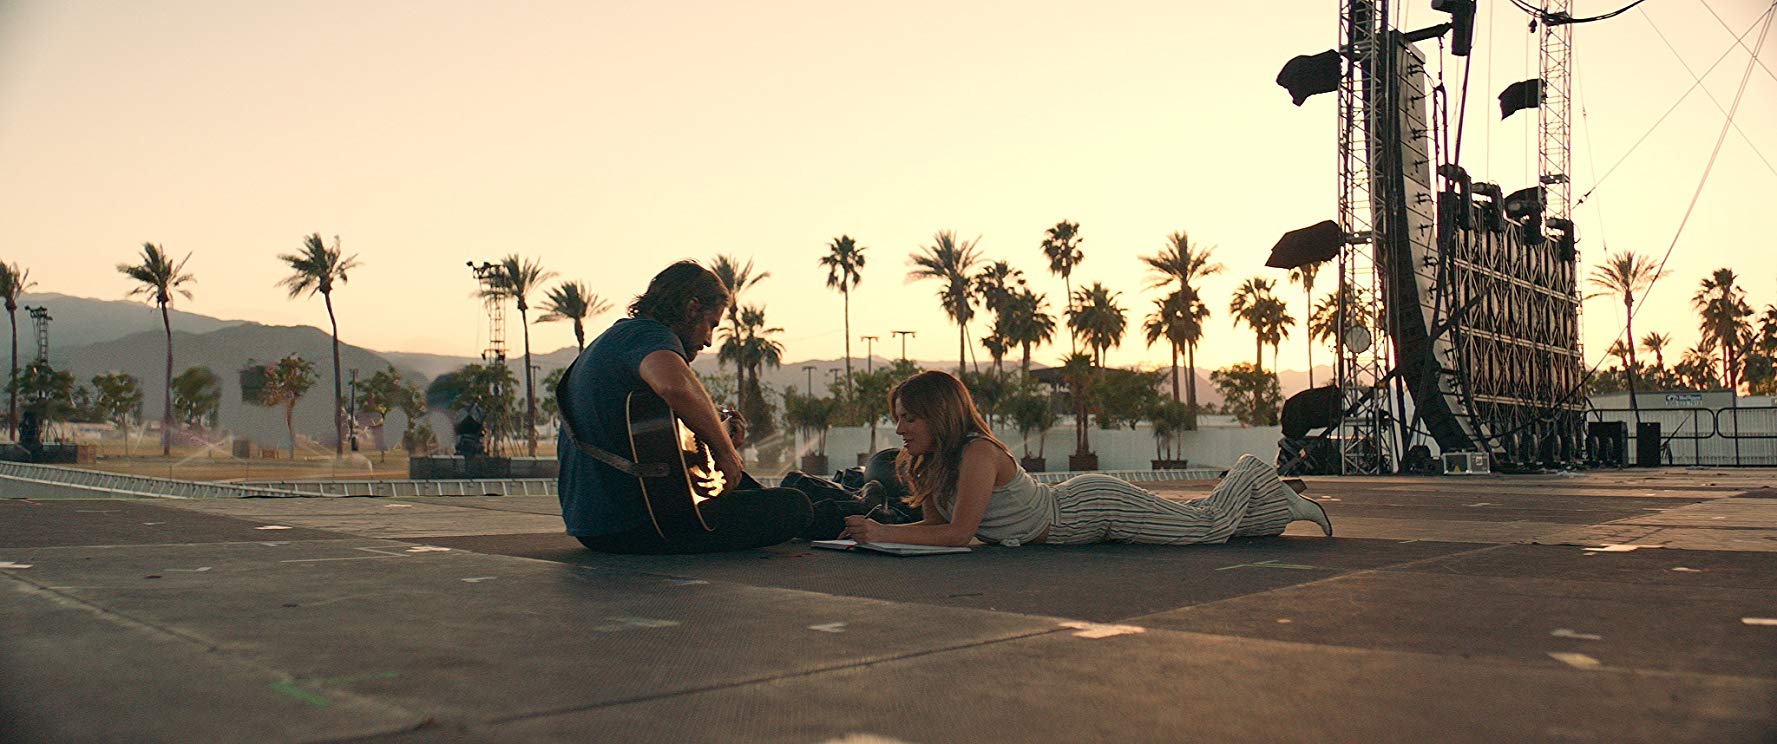 movie review, a star is born, lucas mirabella